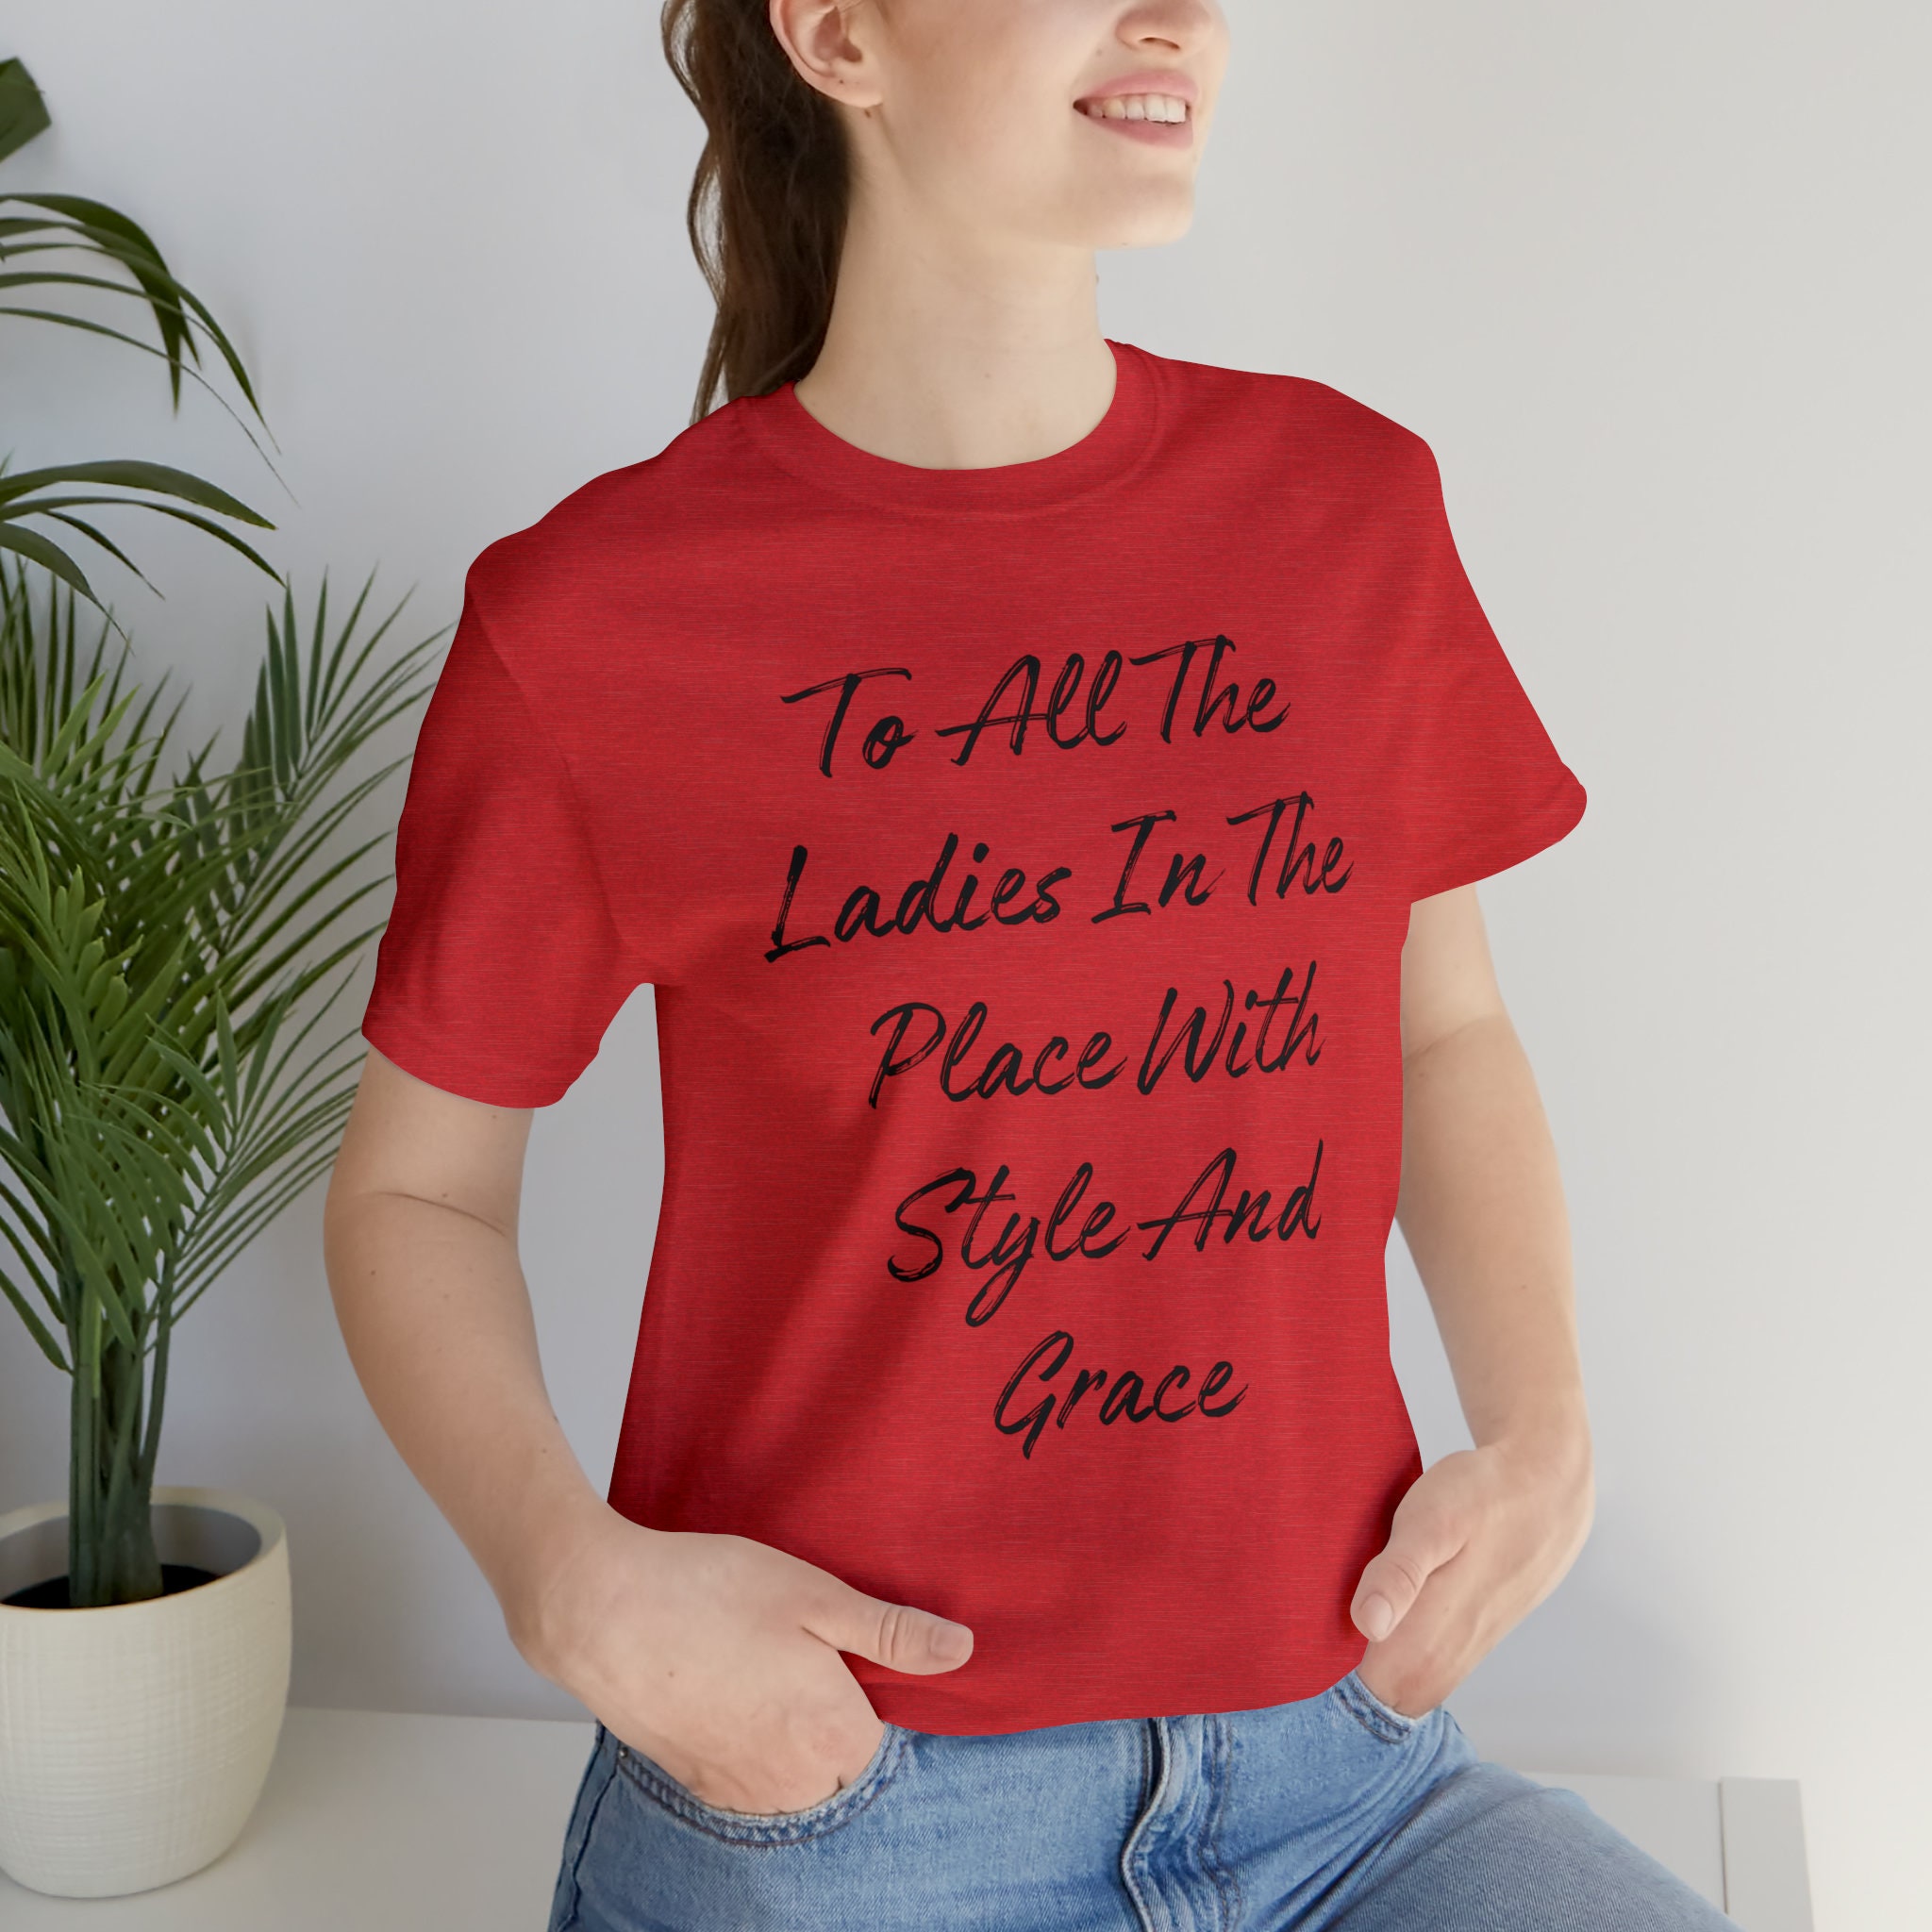 To all the ladies in the place with style & grace - Biggie Smalls